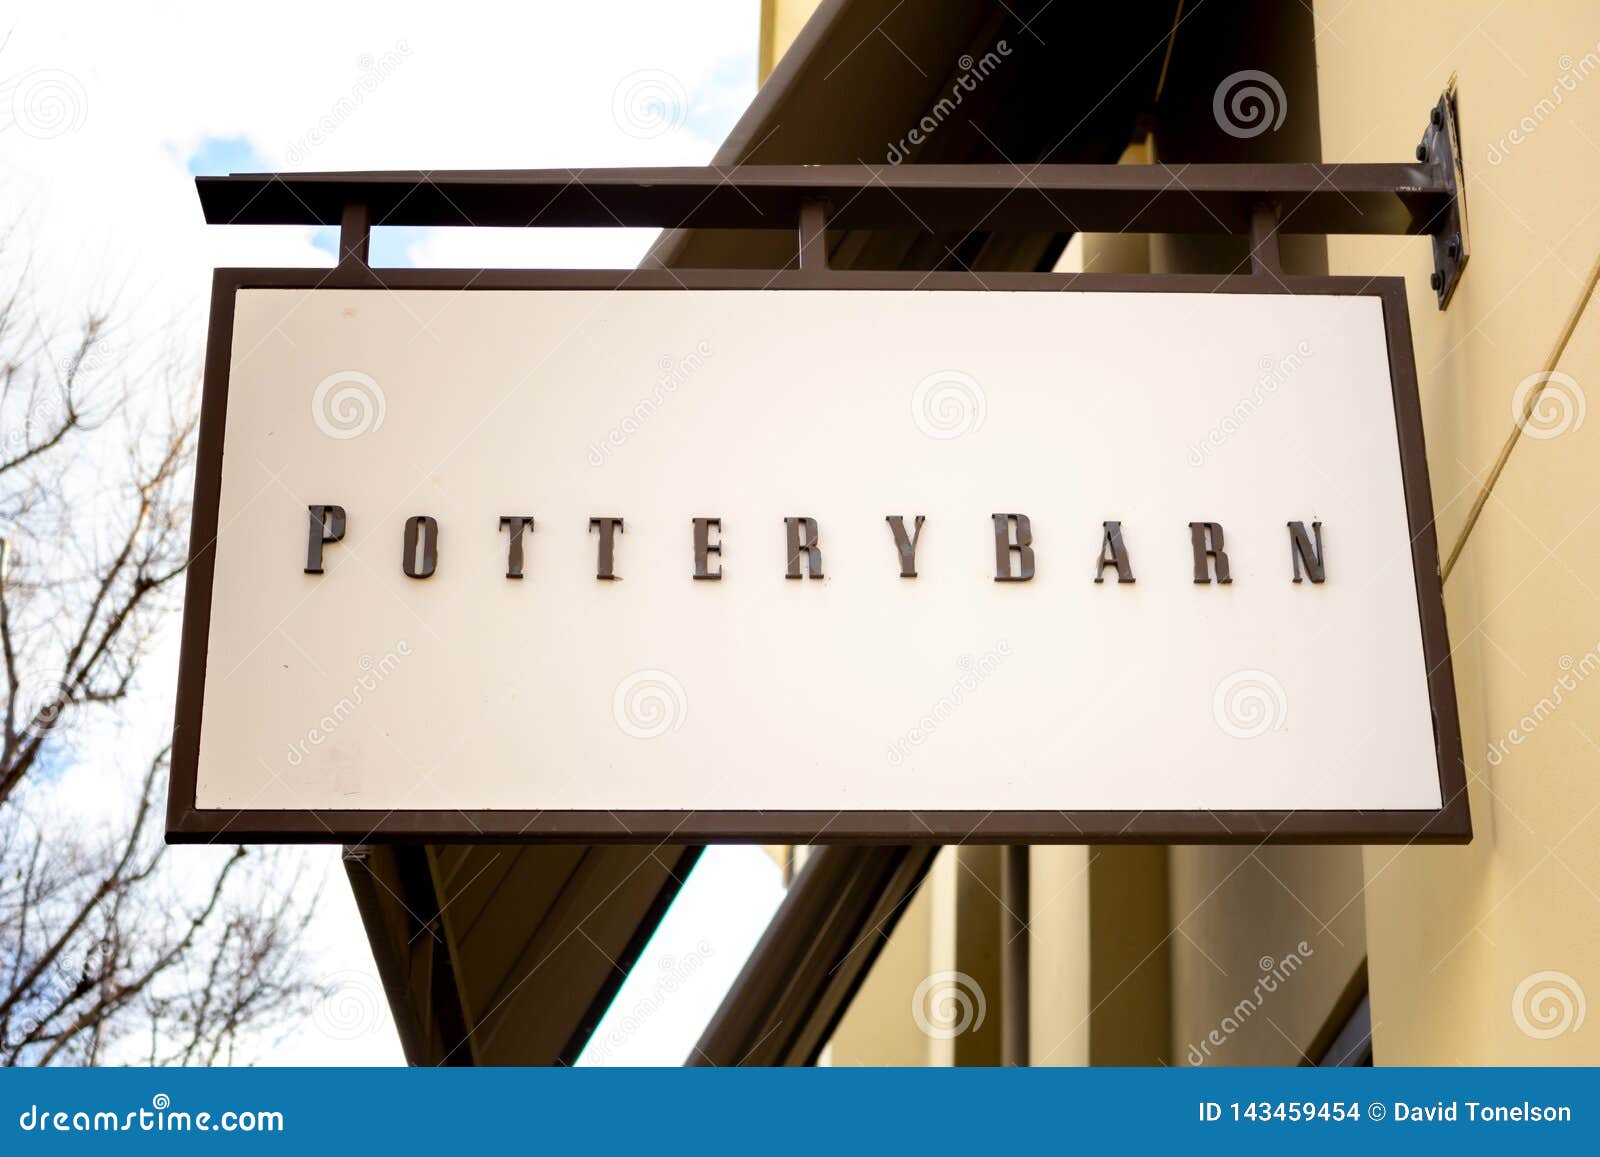 Pottery Barn Store Sign Editorial Stock Image Image Of Commerce 143459454